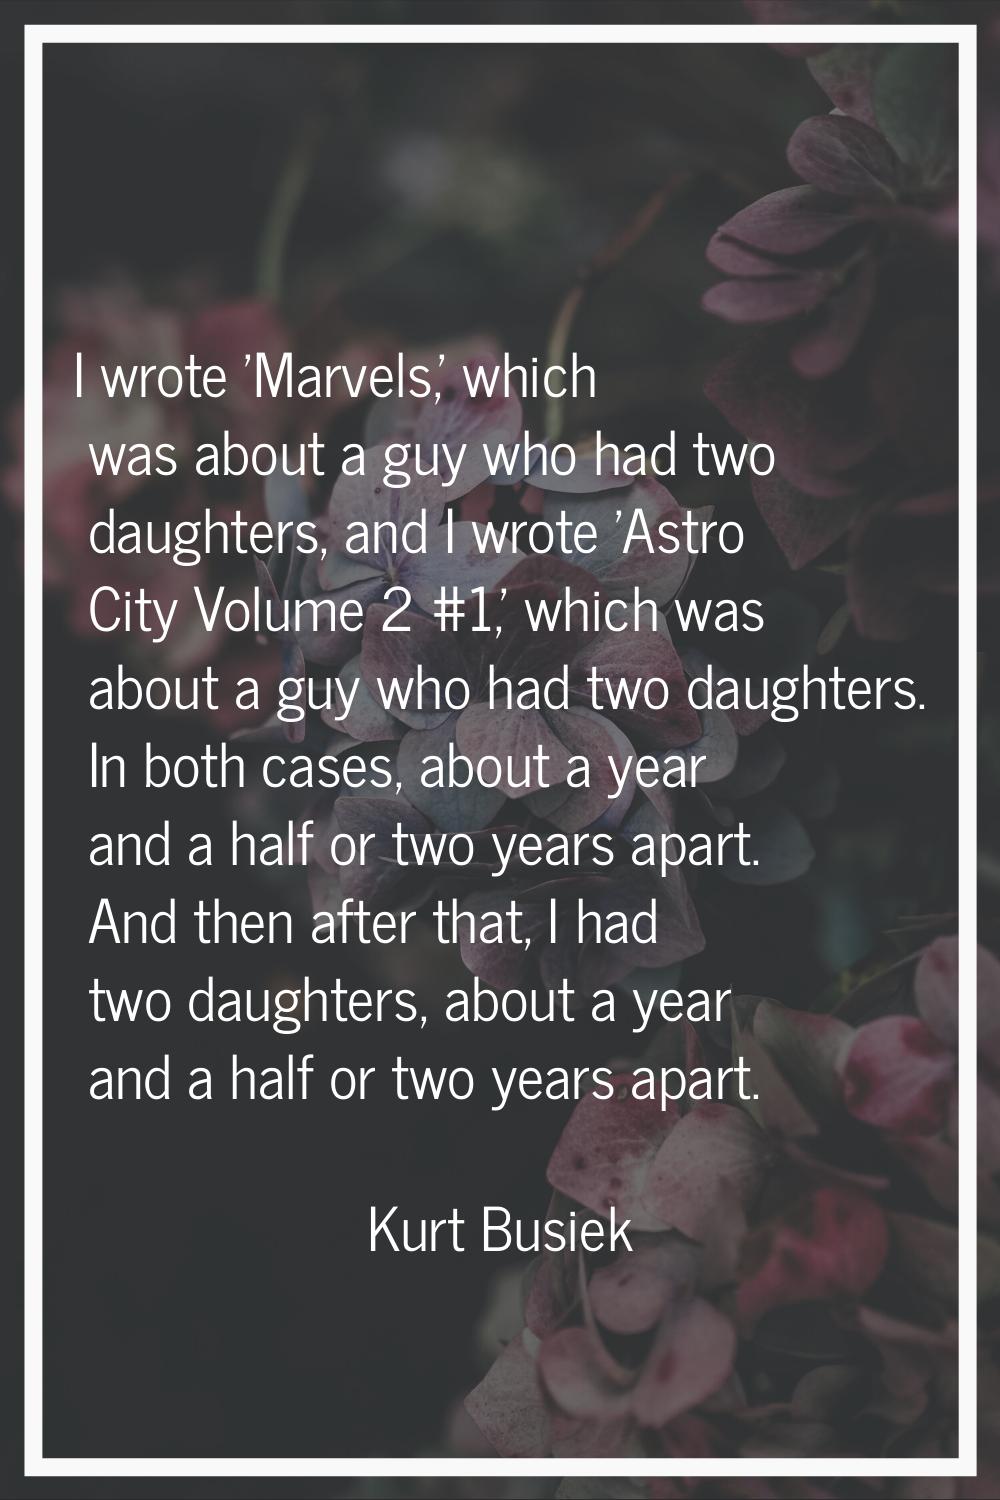 I wrote 'Marvels,' which was about a guy who had two daughters, and I wrote 'Astro City Volume 2 #1